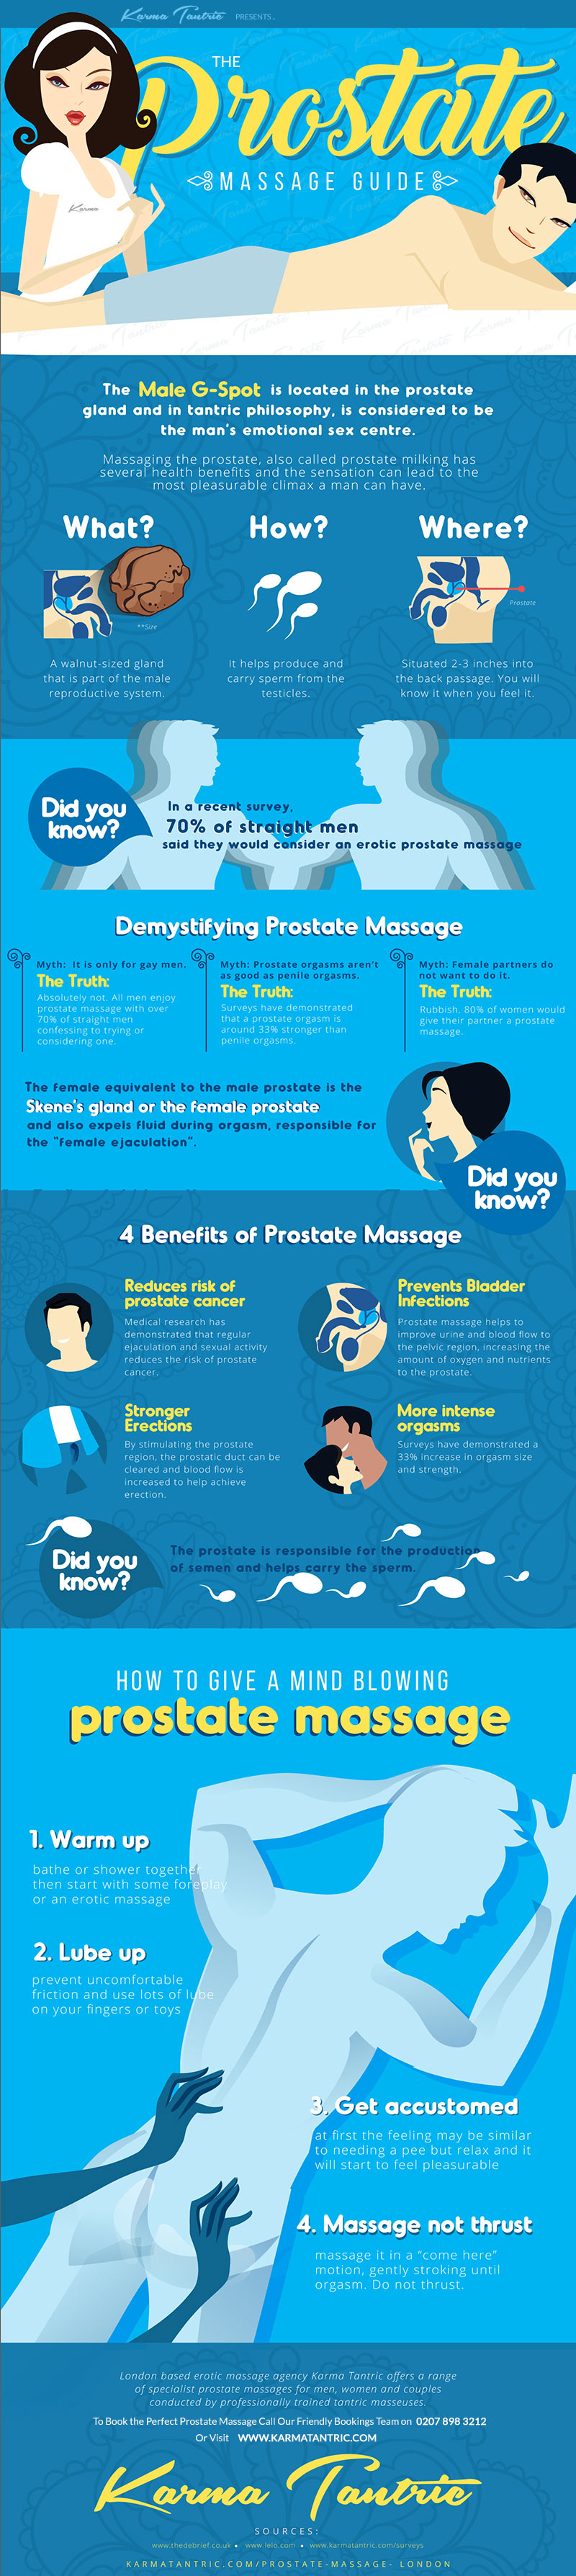 How To Give A Prostate Massage The Ultimate Beducated Guide